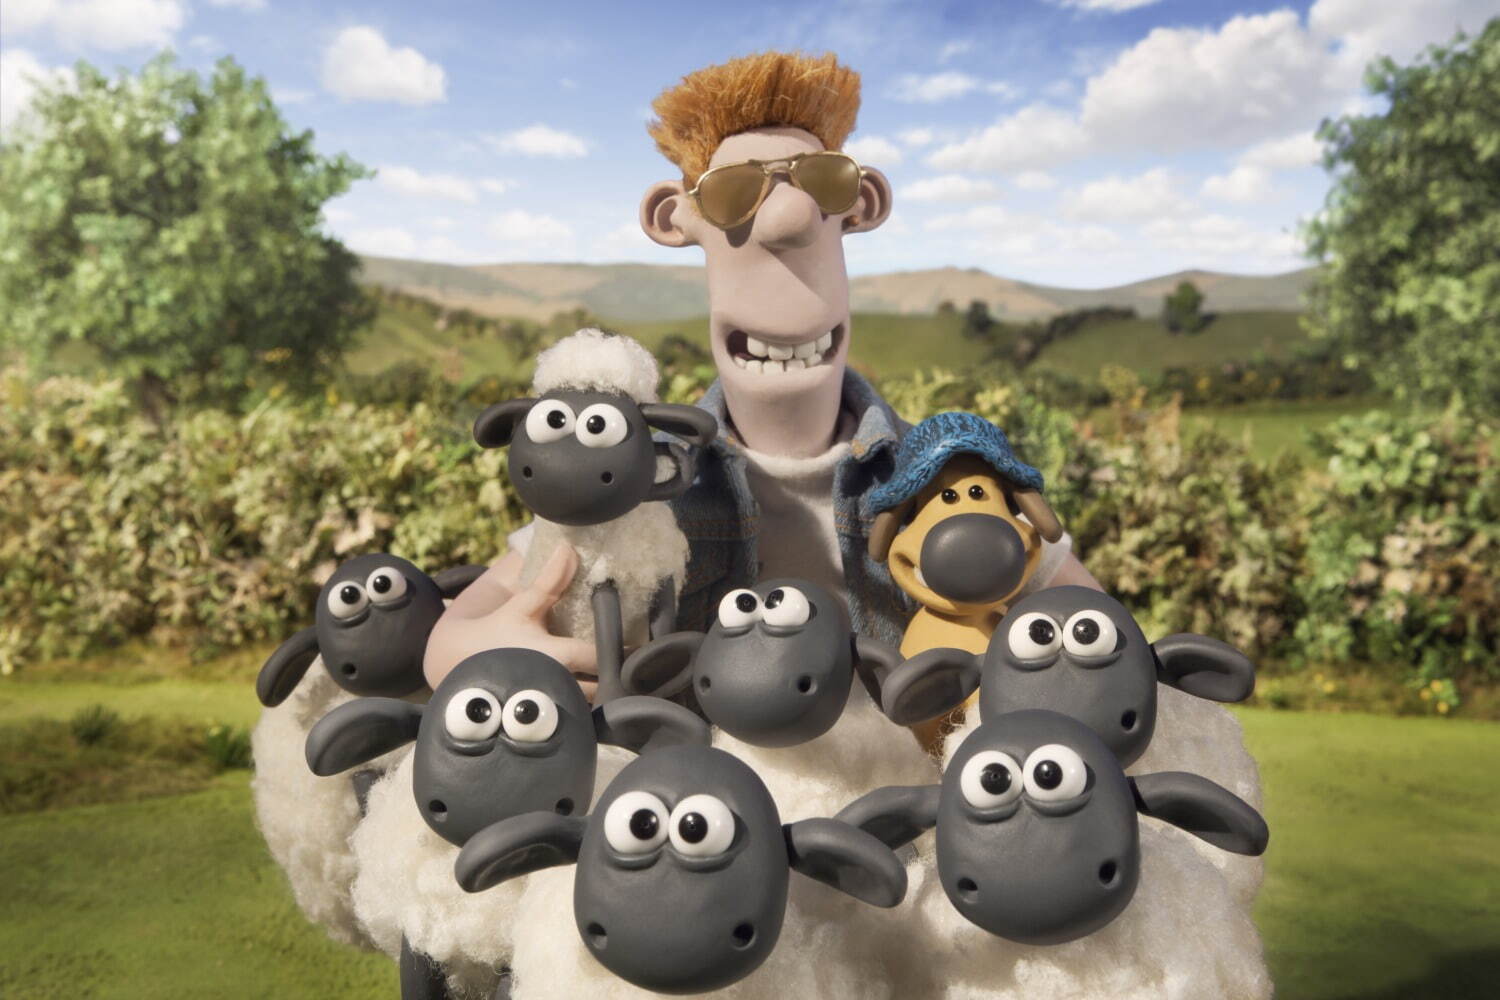 © 2014 Aardman Animations Limited and Studiocanal S.A.